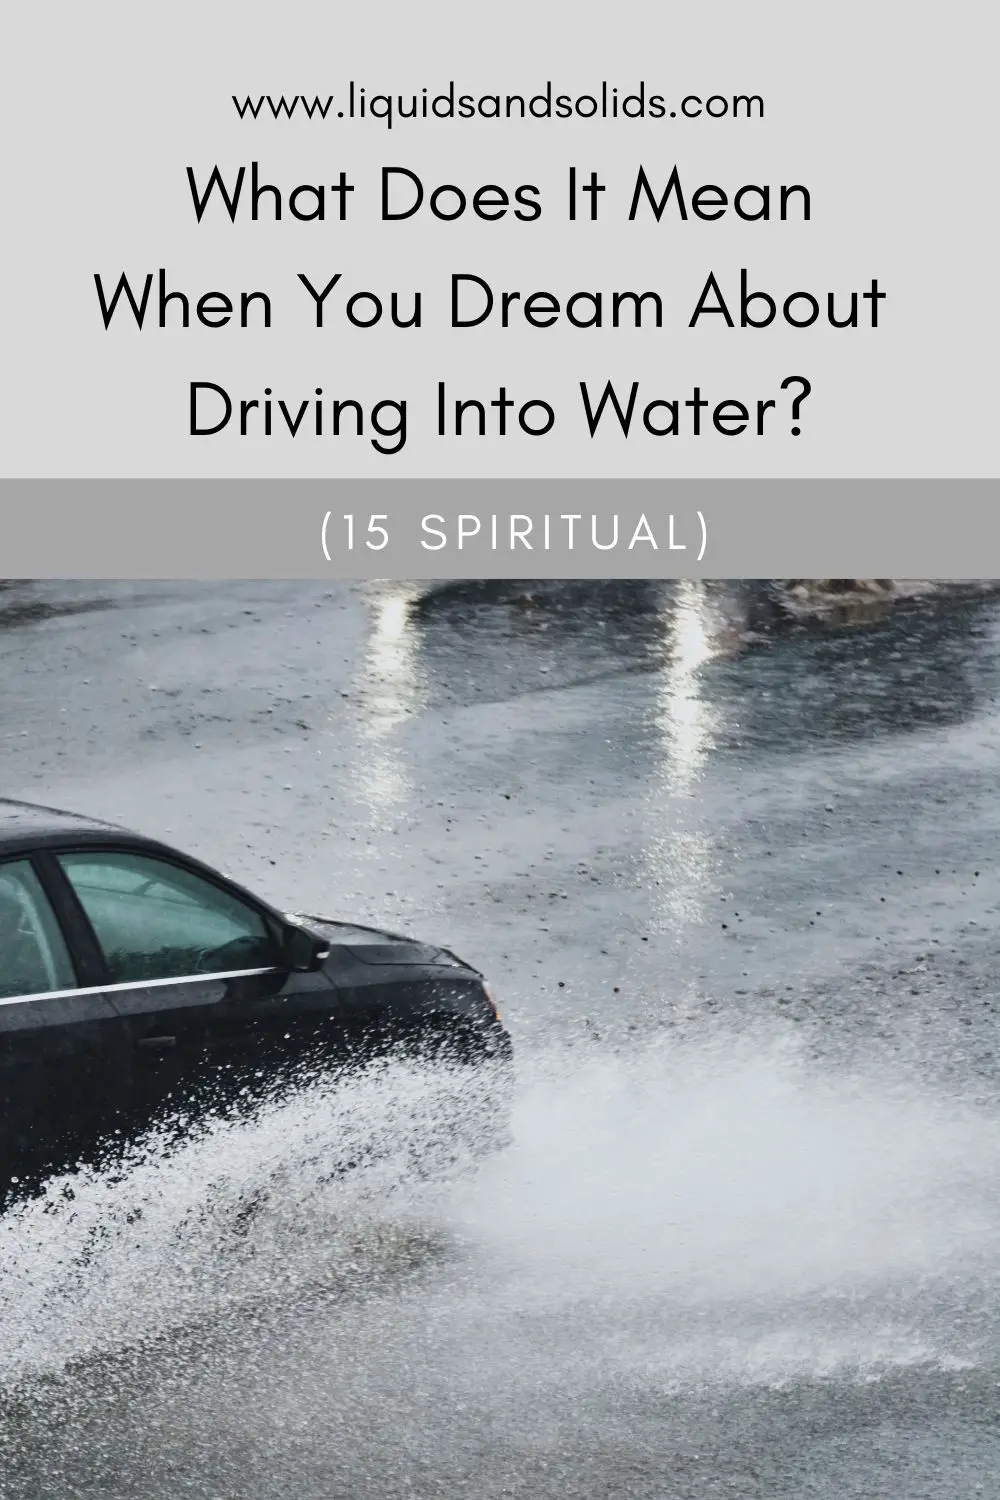 How To Interpret Dreams Of Driving Up A Steep Hill